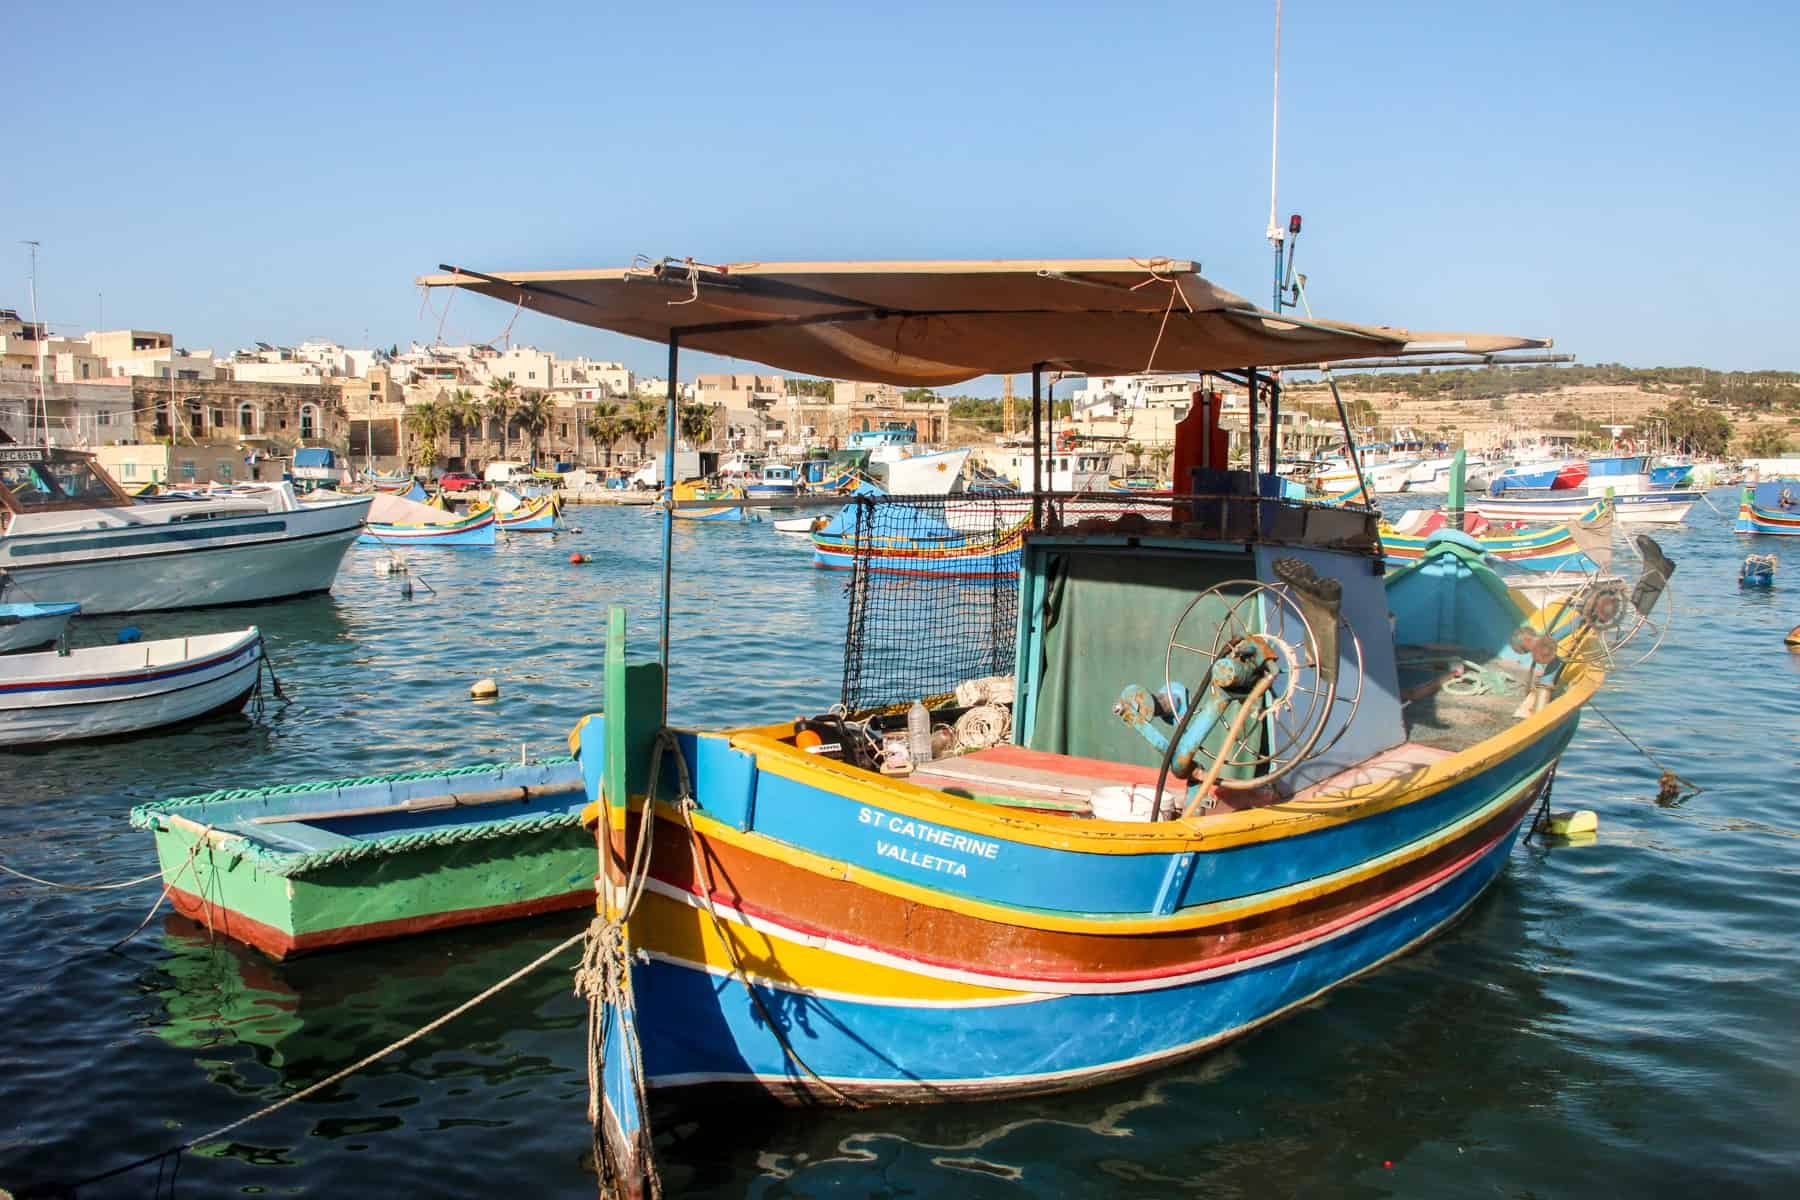 A boat painted in yellow, blue and ochre red stripes in Marsaxlokk Fishing Village, Malta. 